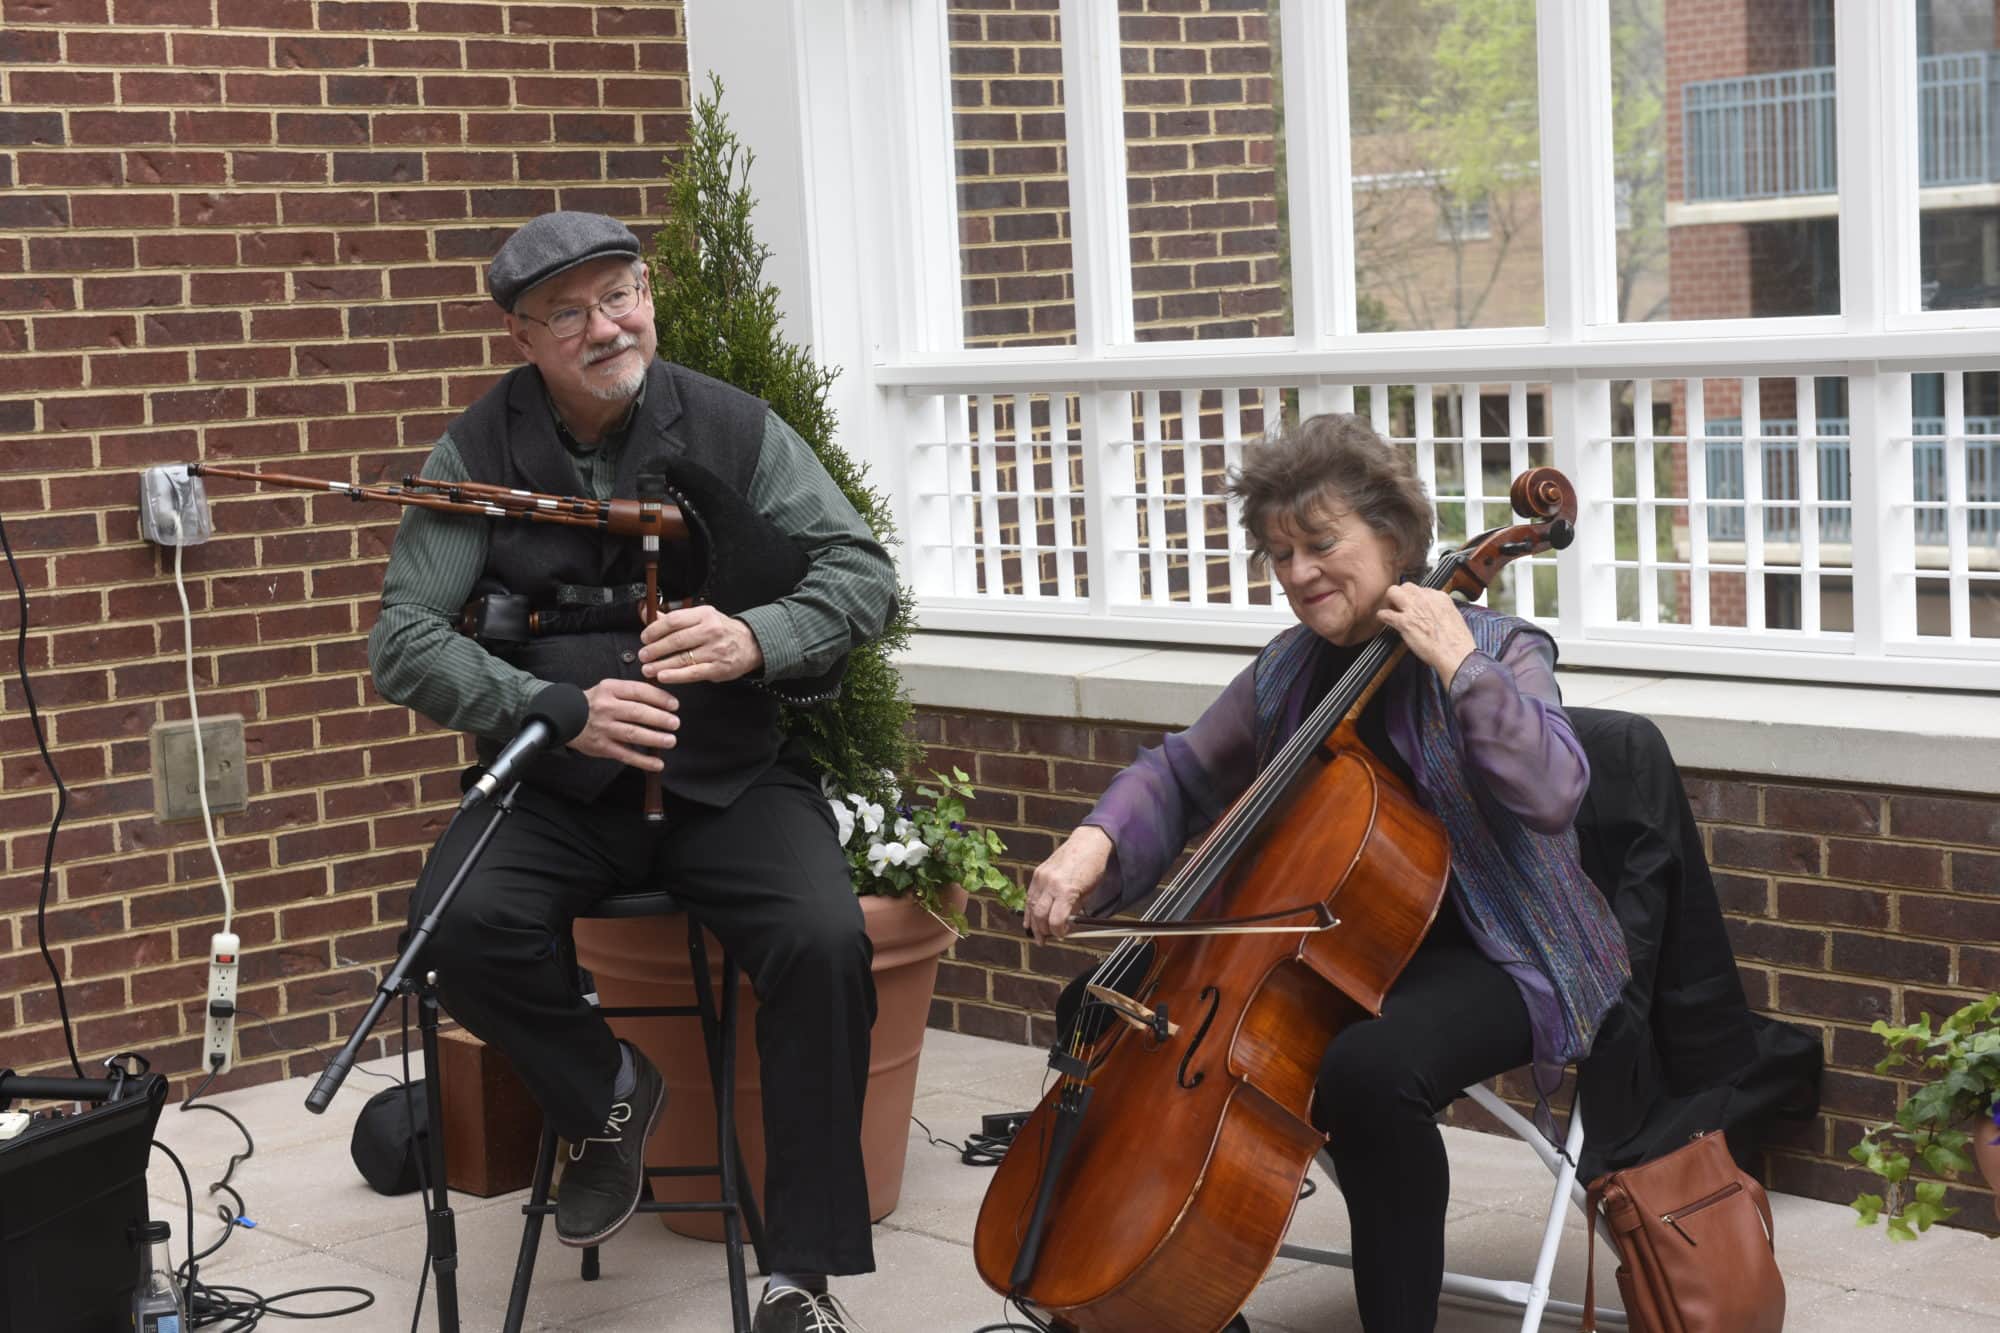 Cellist and musician at The Kensington Falls Church event